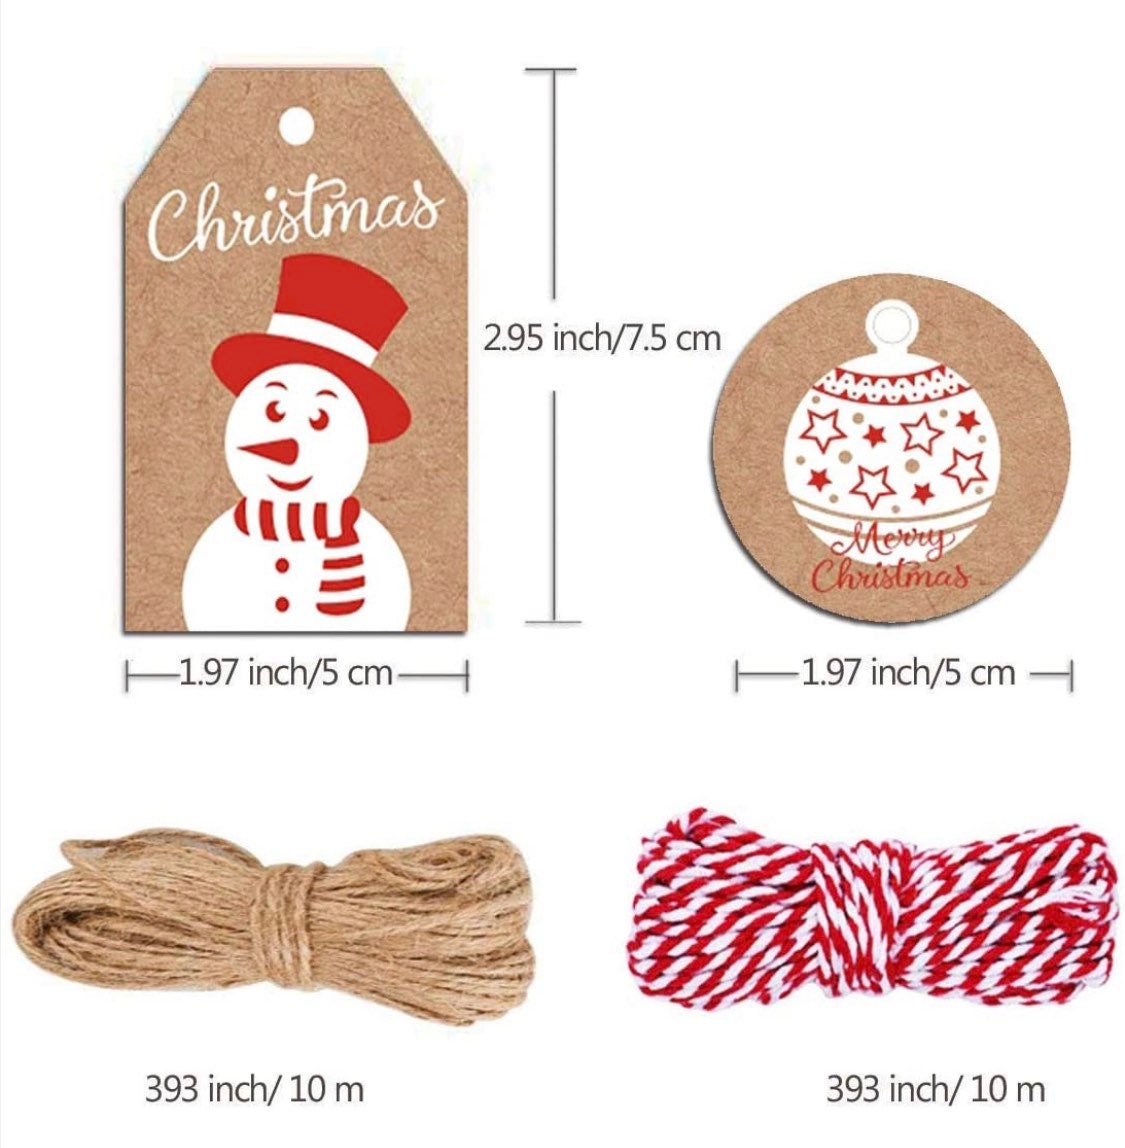 Gift tag set - 25ct Eco friendly sustainable recyclable Kraft paper Christmas gift tags - present tags with holiday winter themes